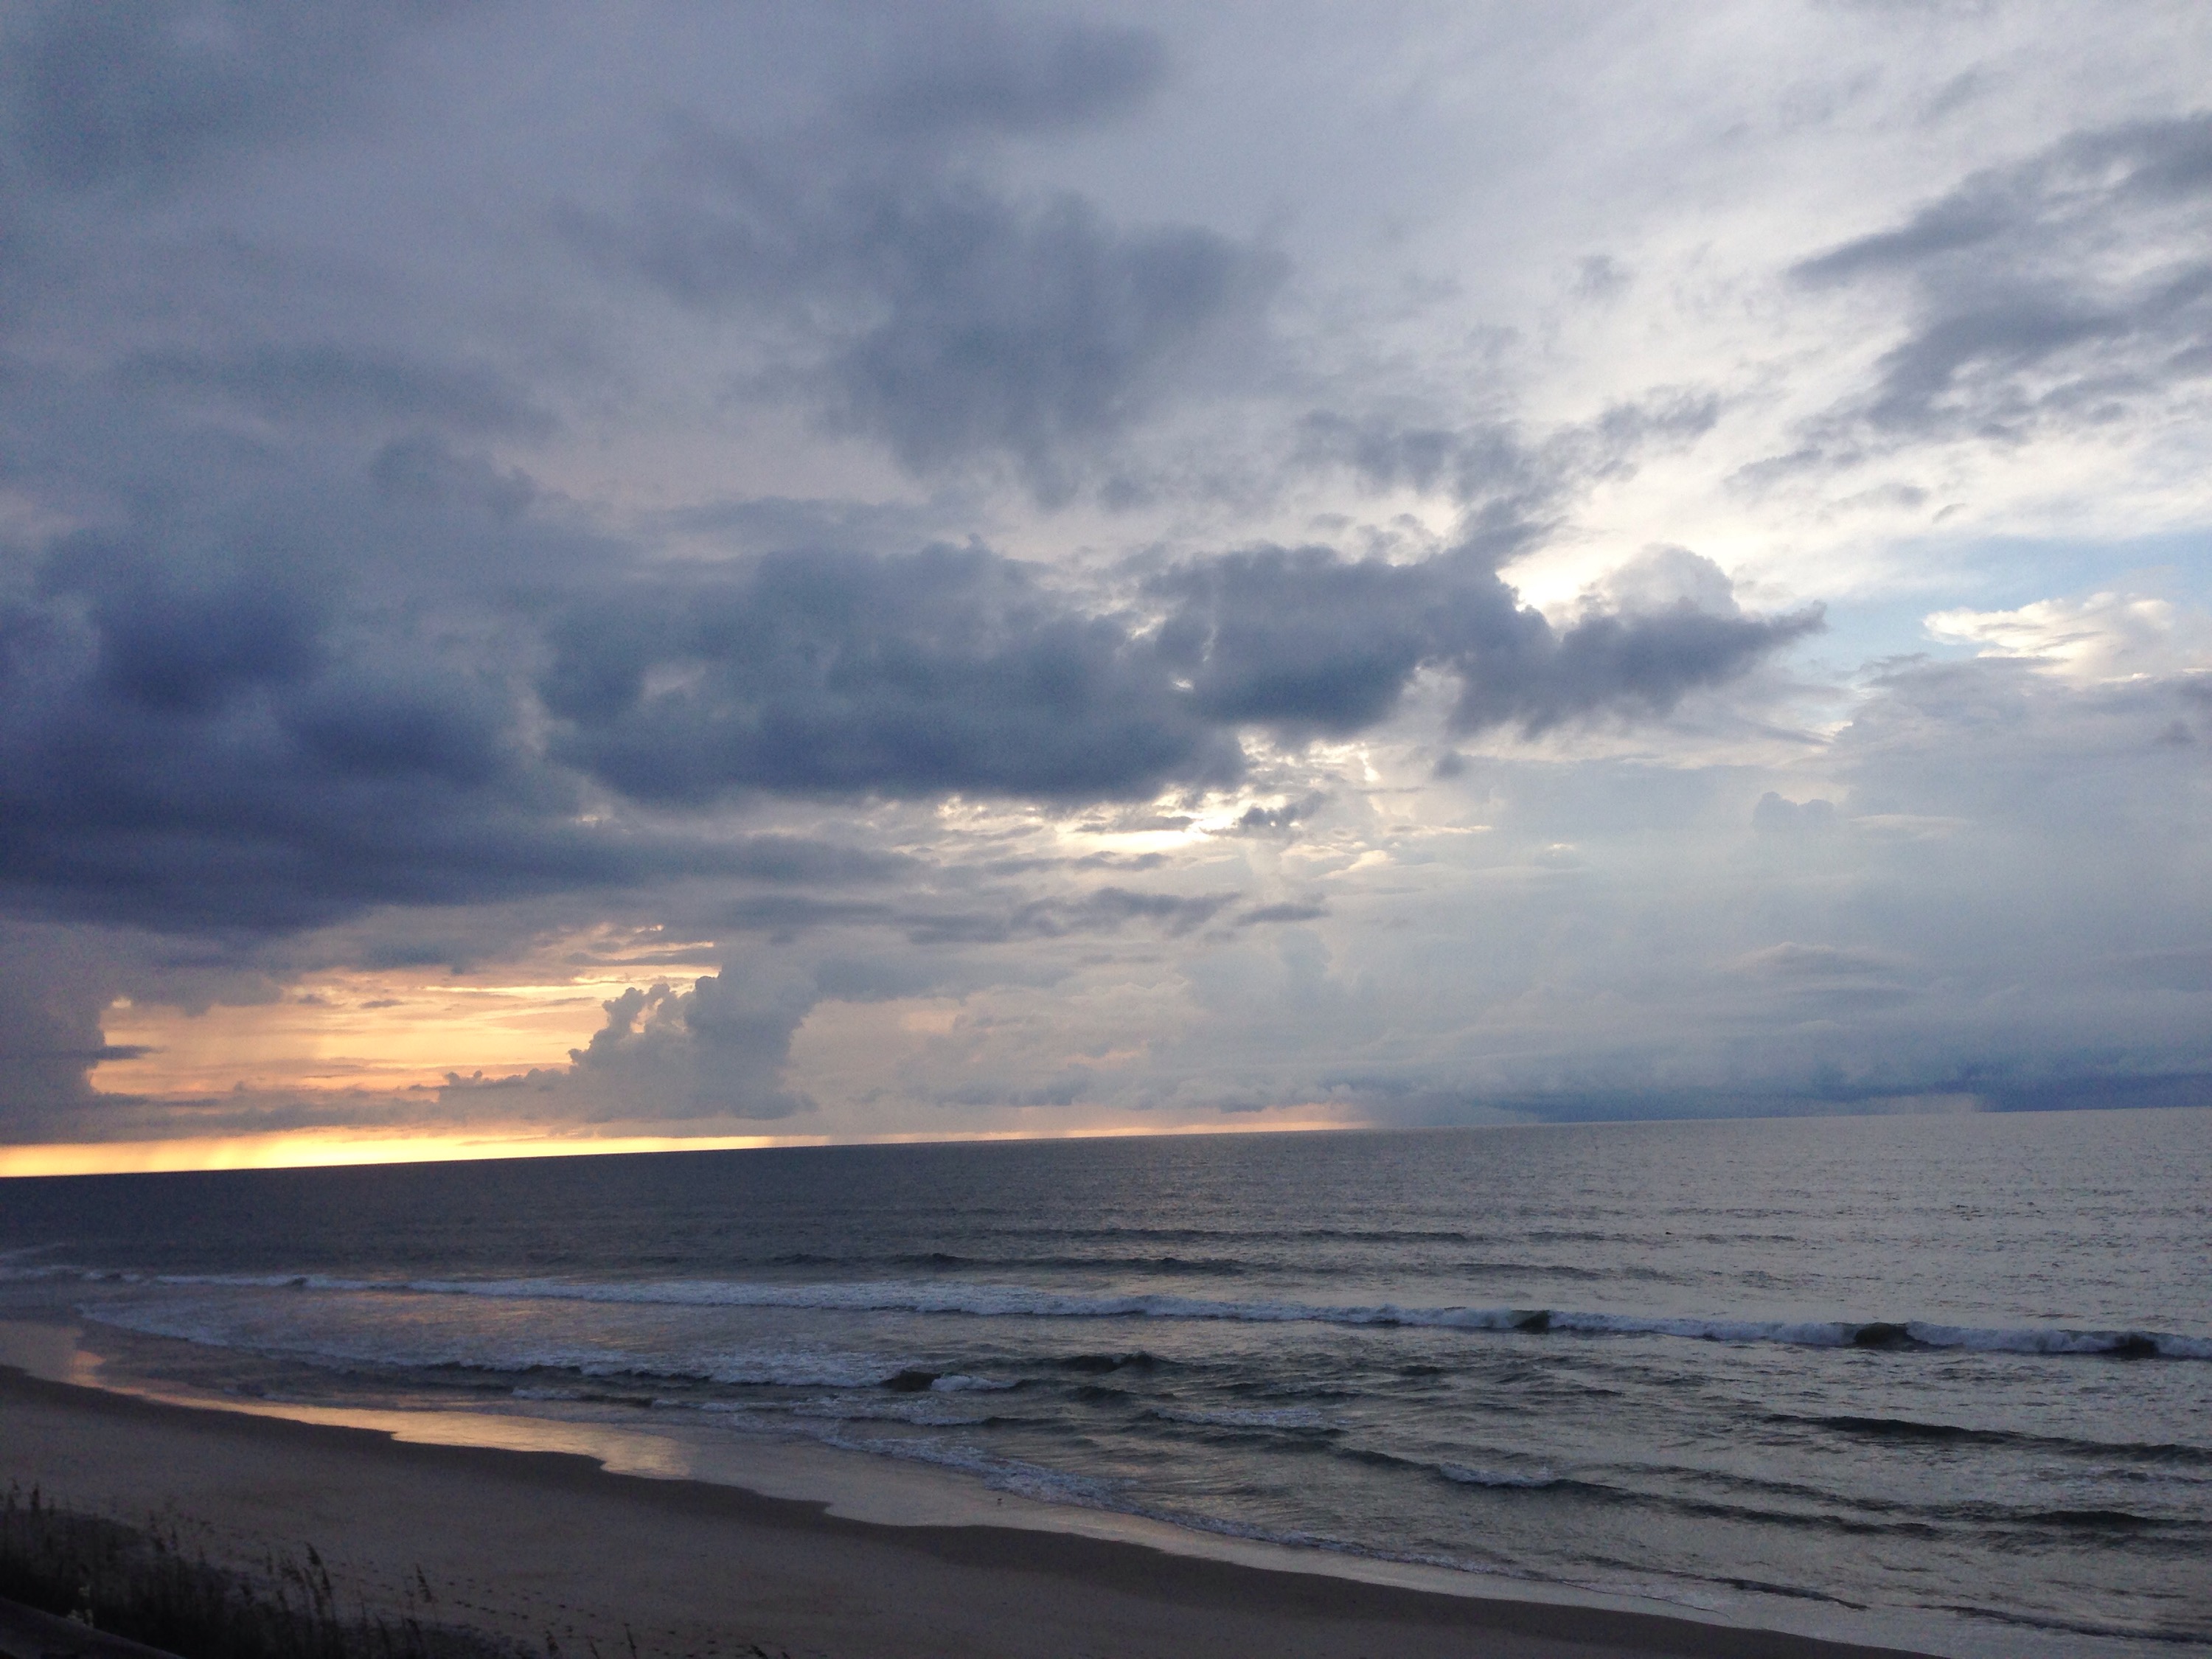 storm brewing off topsail island